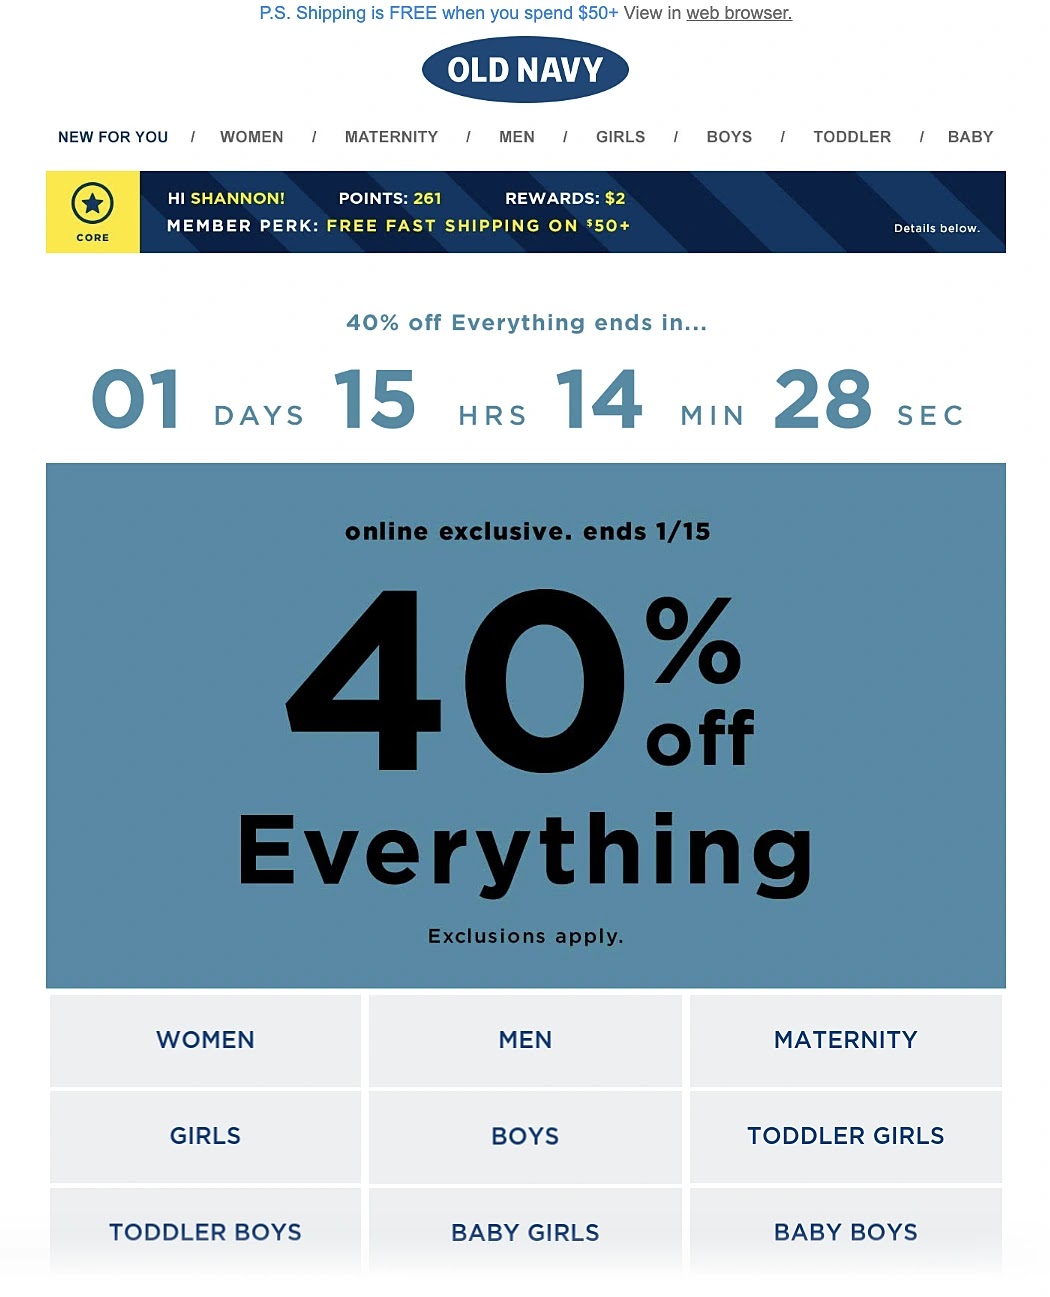 An email from Old Navy, with a countdown of their special 40% off offer